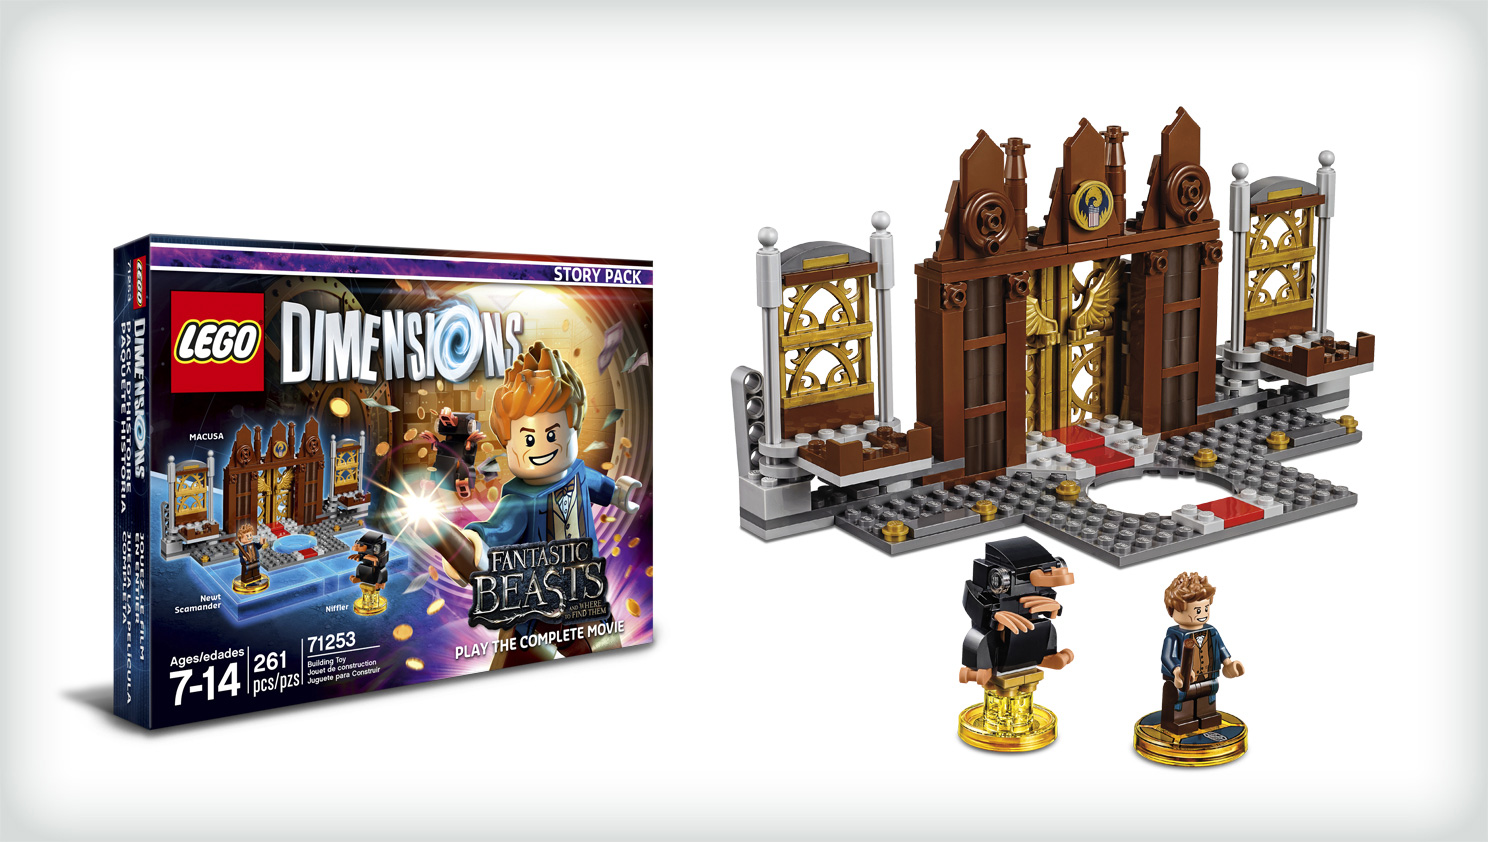 Fantastic Beasts Available Now in Lego Dimensions